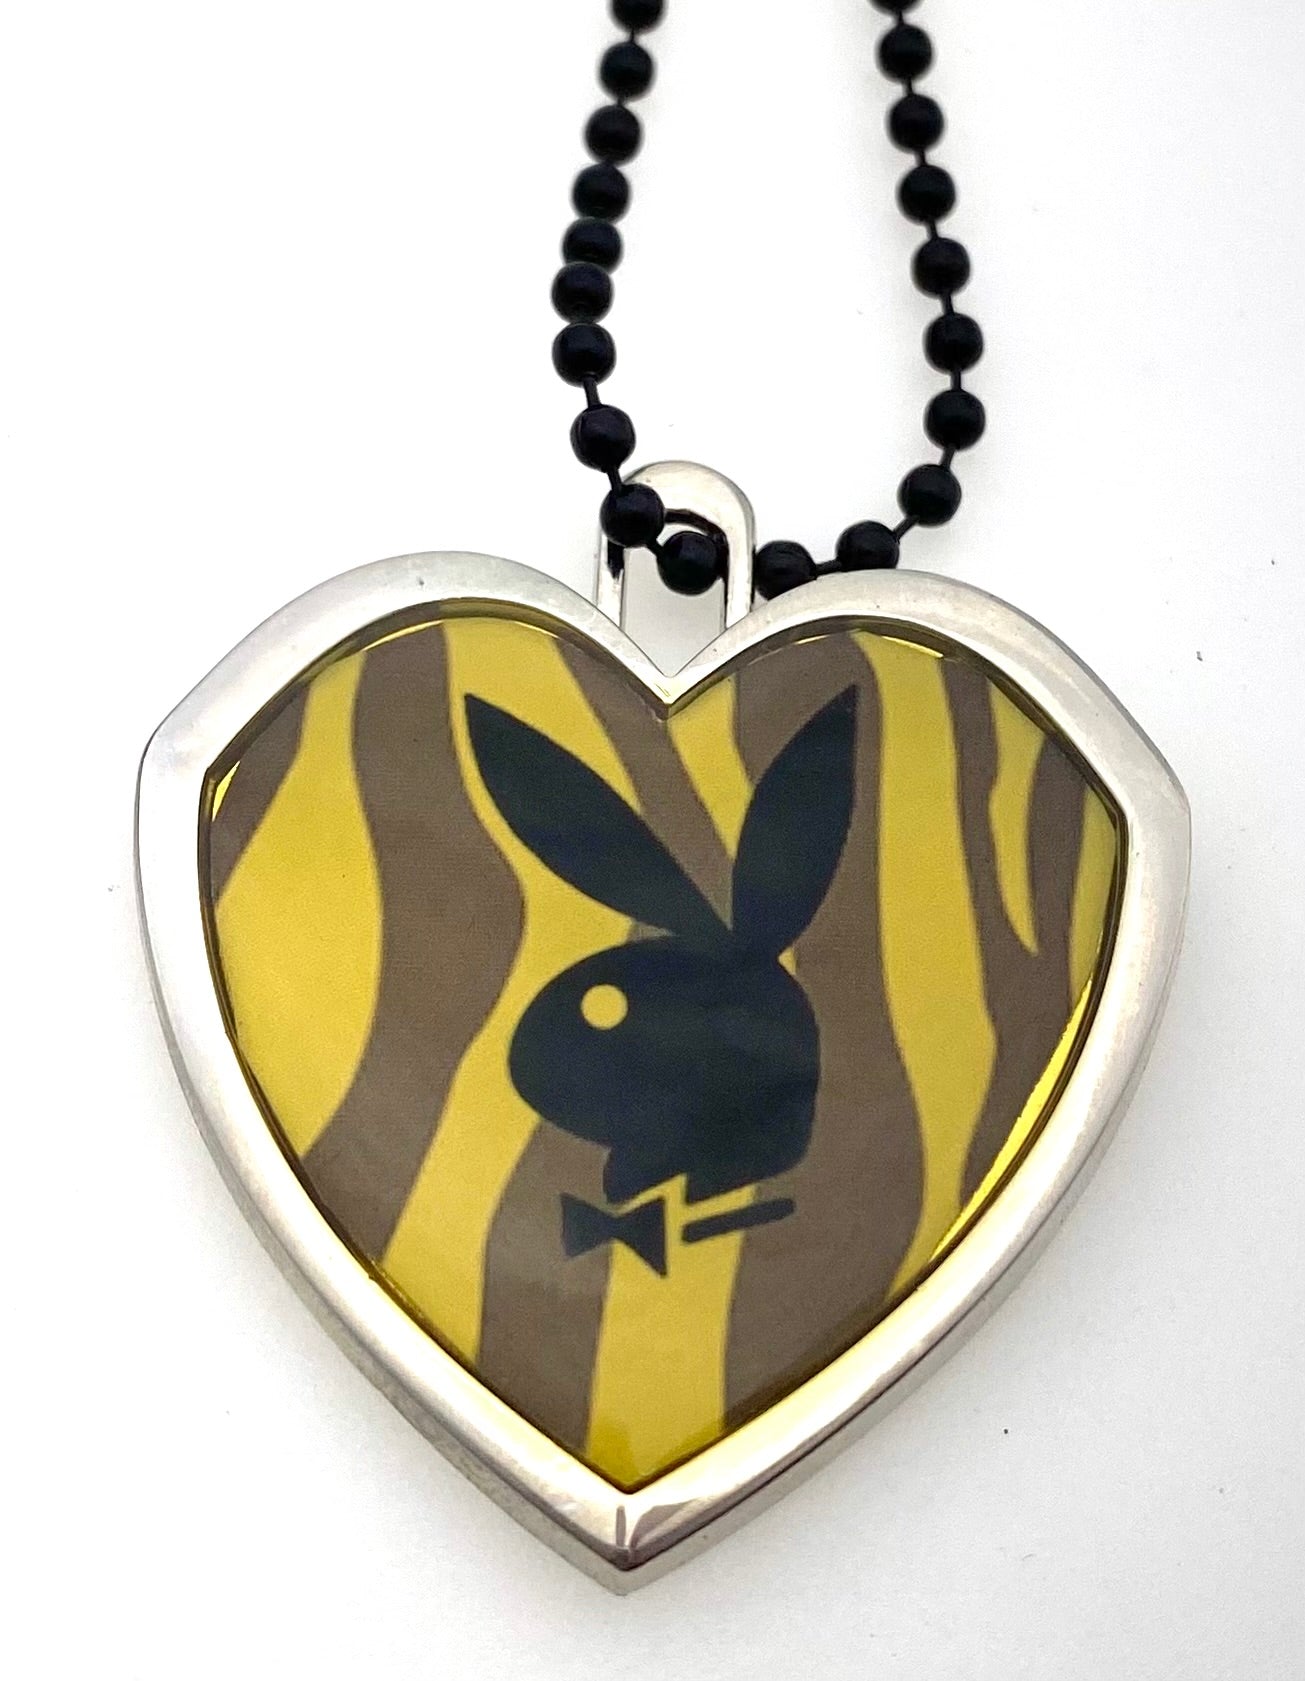 Playboy Heart Shape with Bunny in a Leopard print design PENDANT